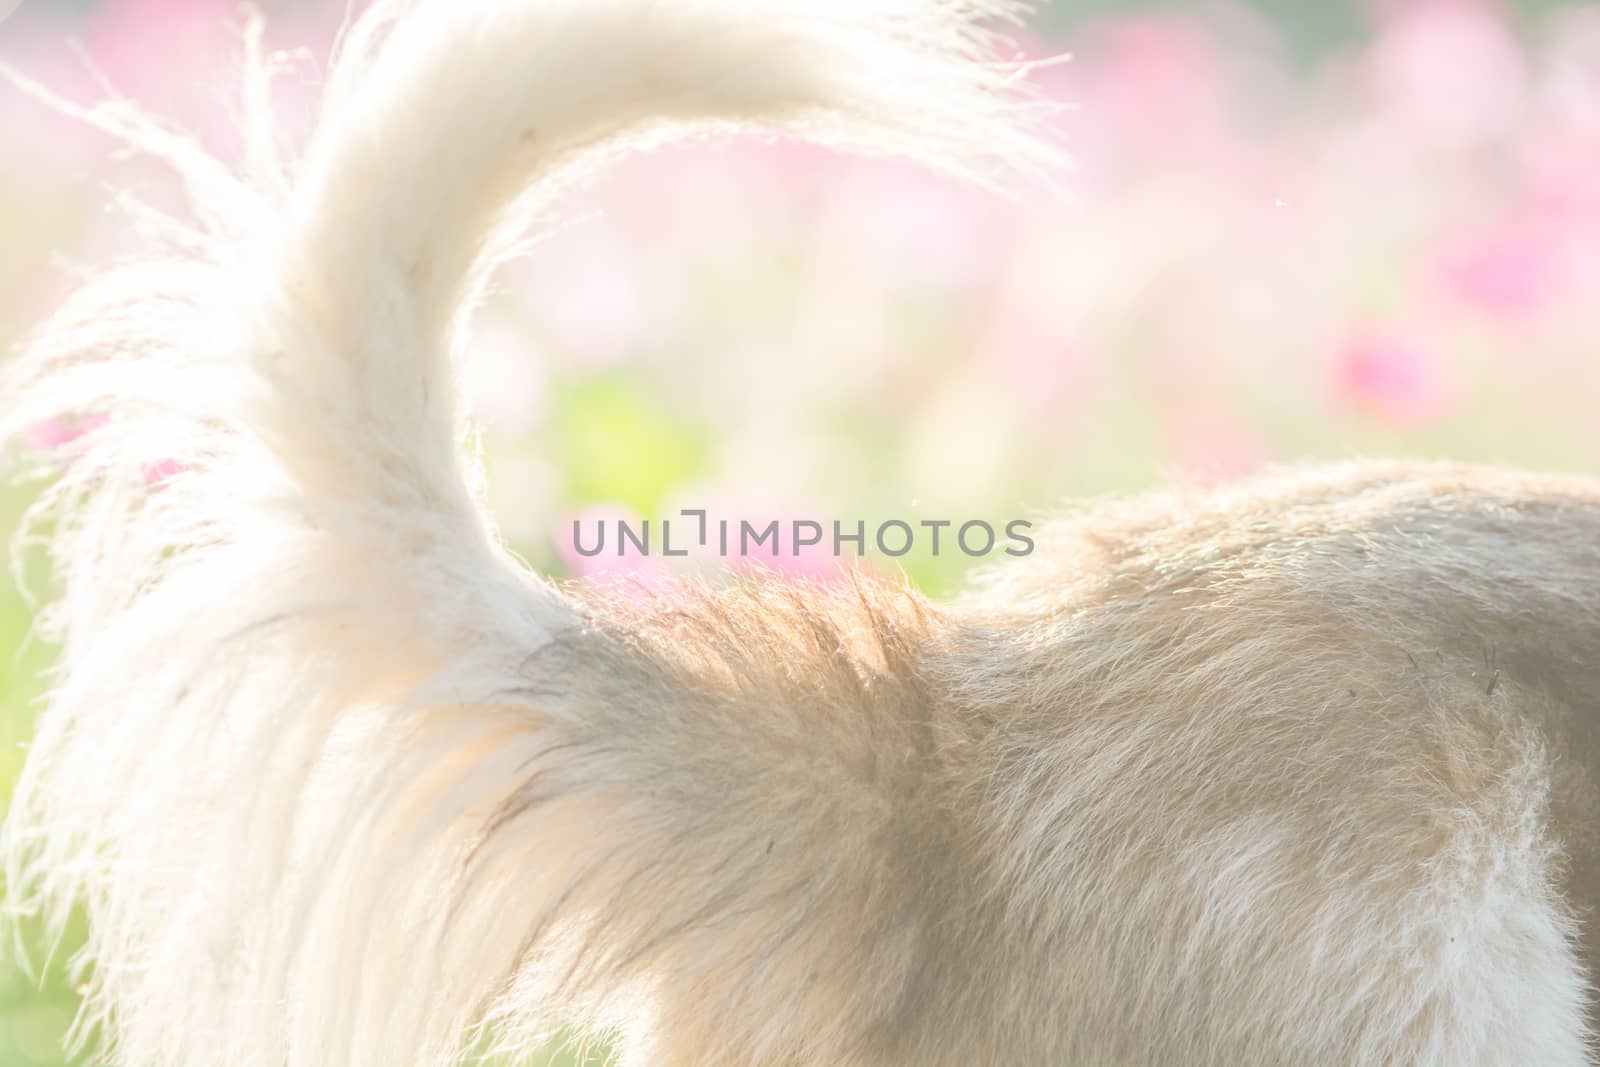 Blurry dog and flower for background  by yuiyuize